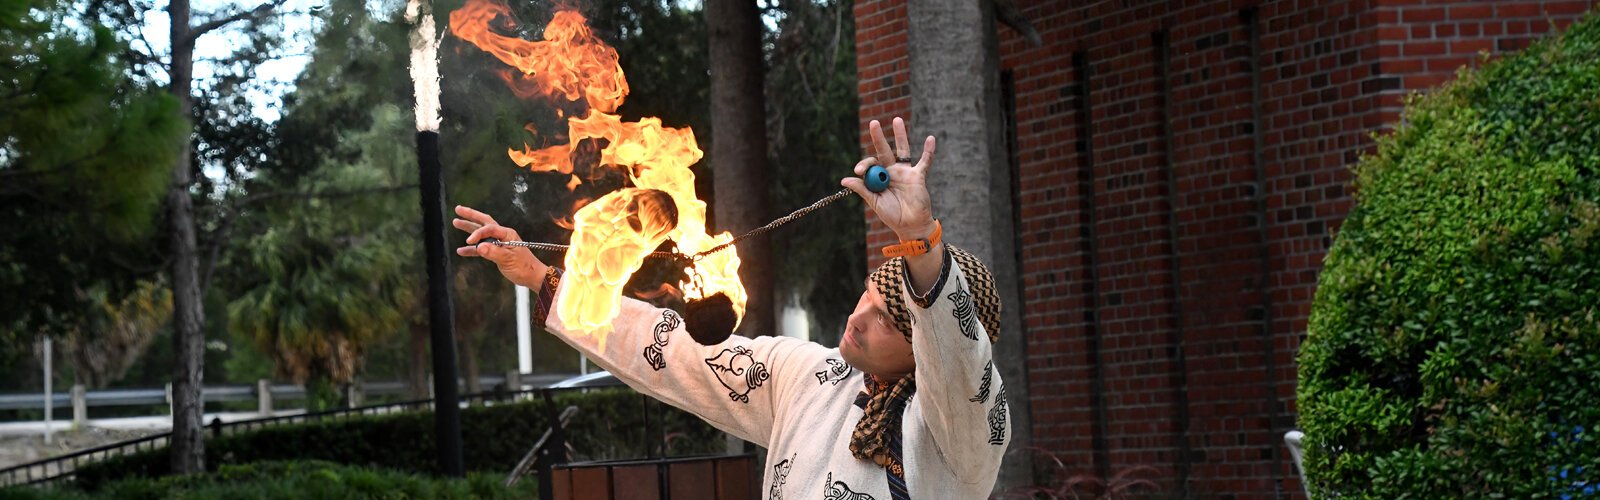 Dancing with fire, David Buczynski demonstrates the art of Fire Poi at the Dance Now festival in Water Works Park in Tampa.